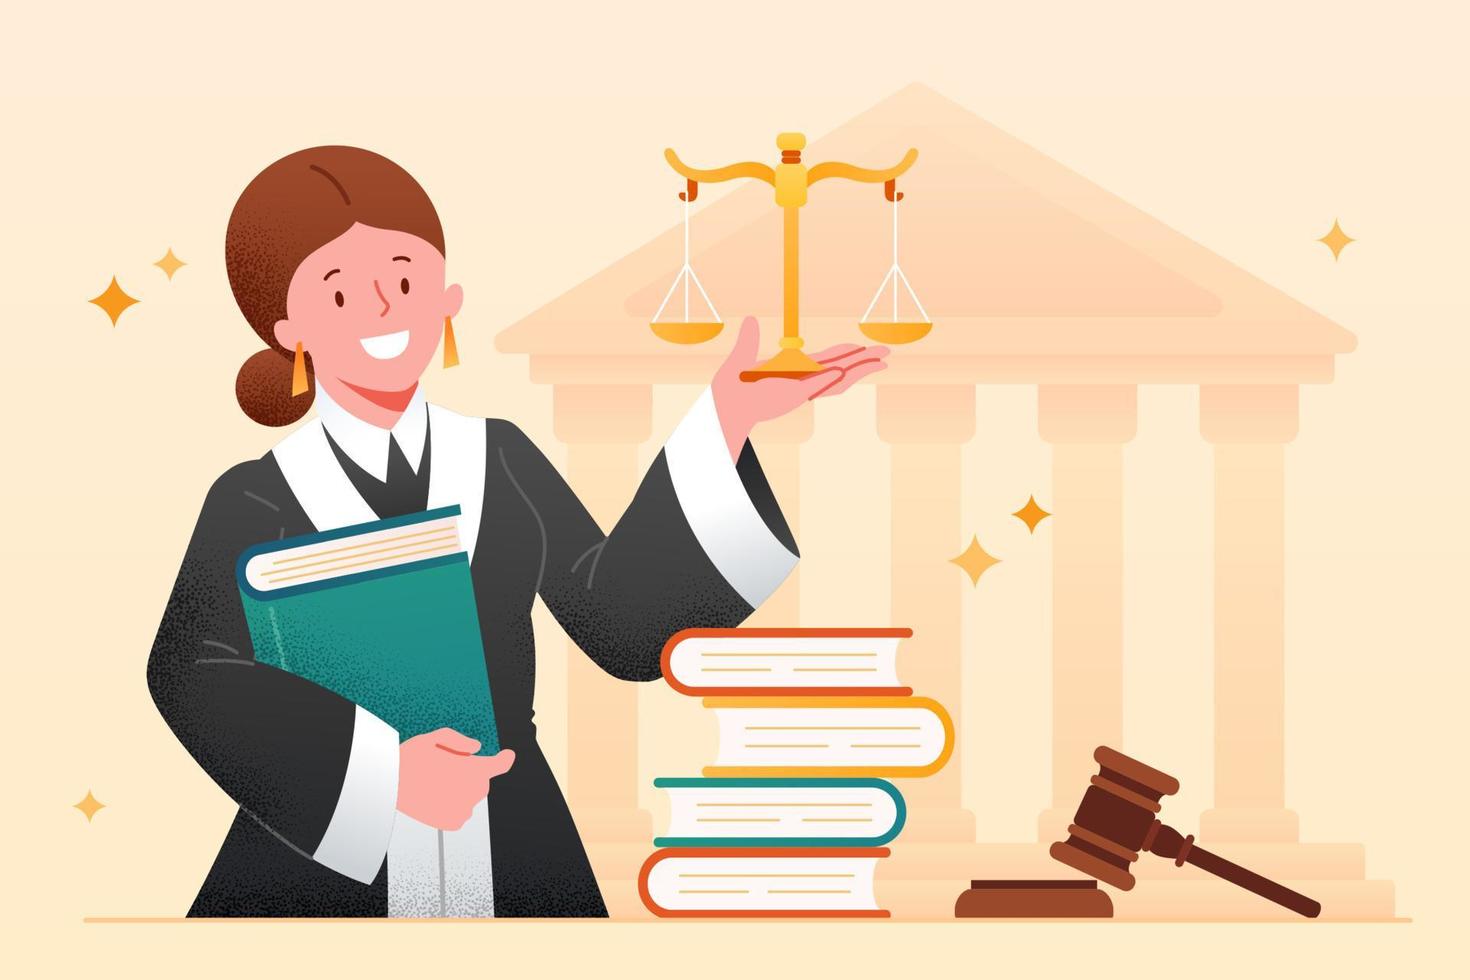 Female lawyer Flat vector illustration. Woman judge with books and scales of justice, court building in background.